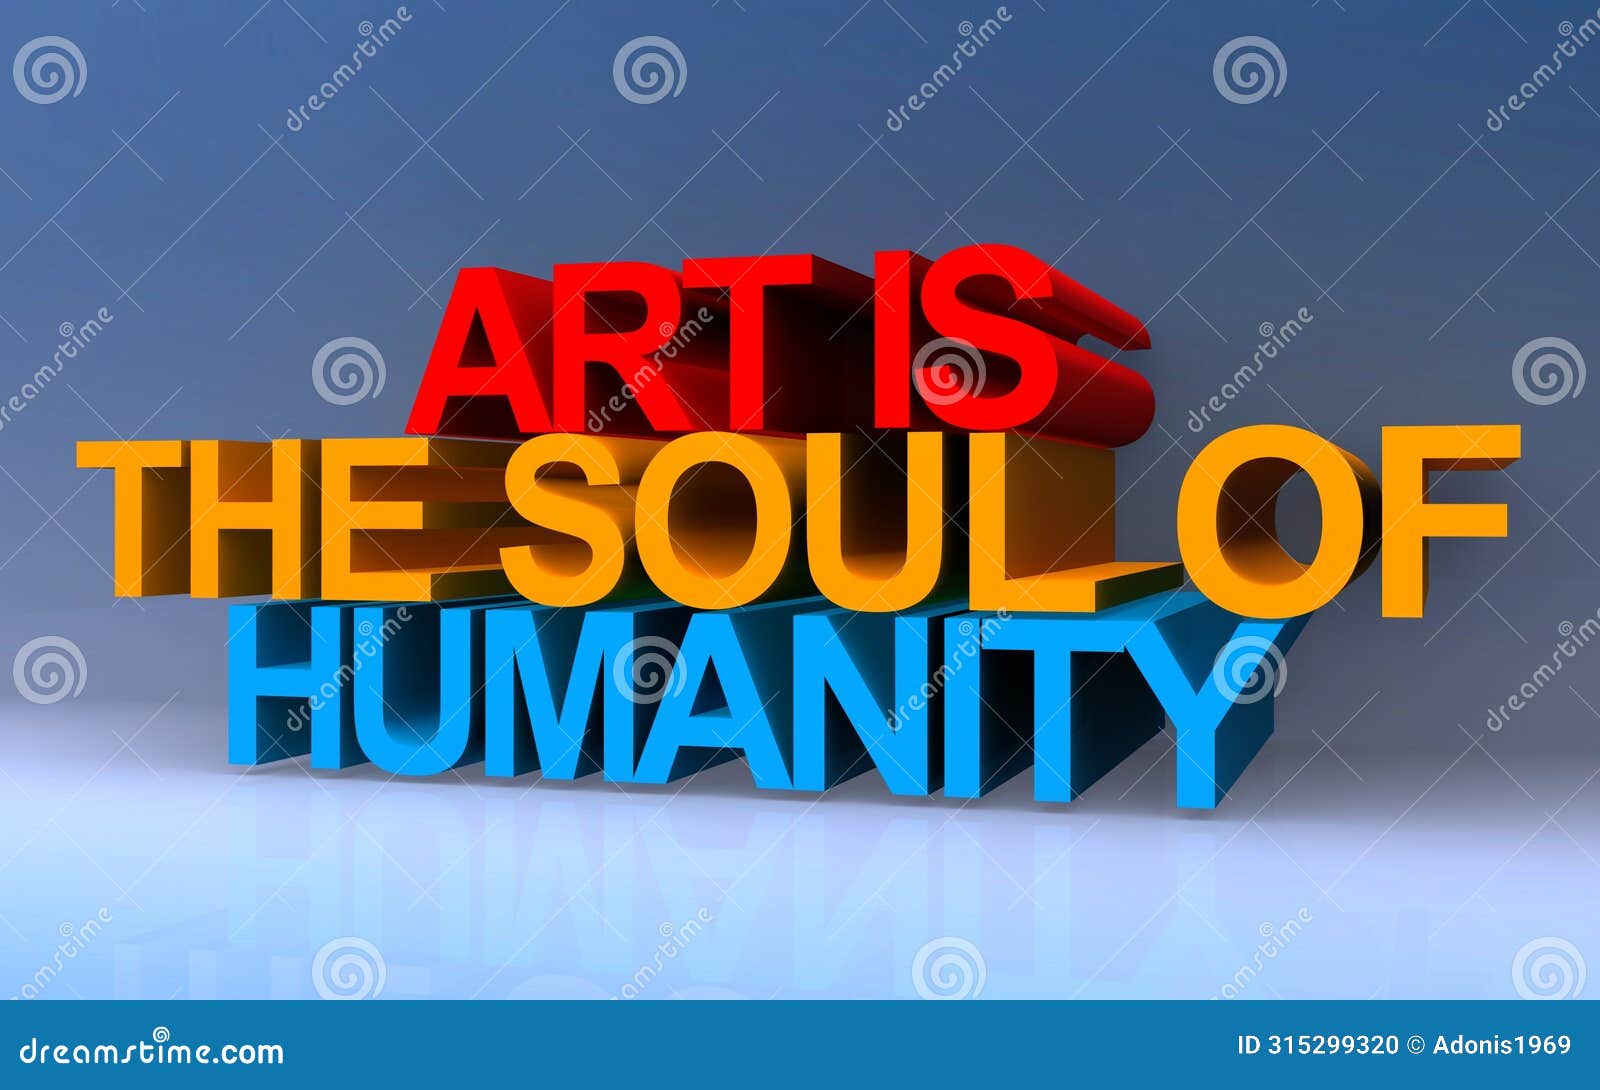 art is the soul of humanity on blue